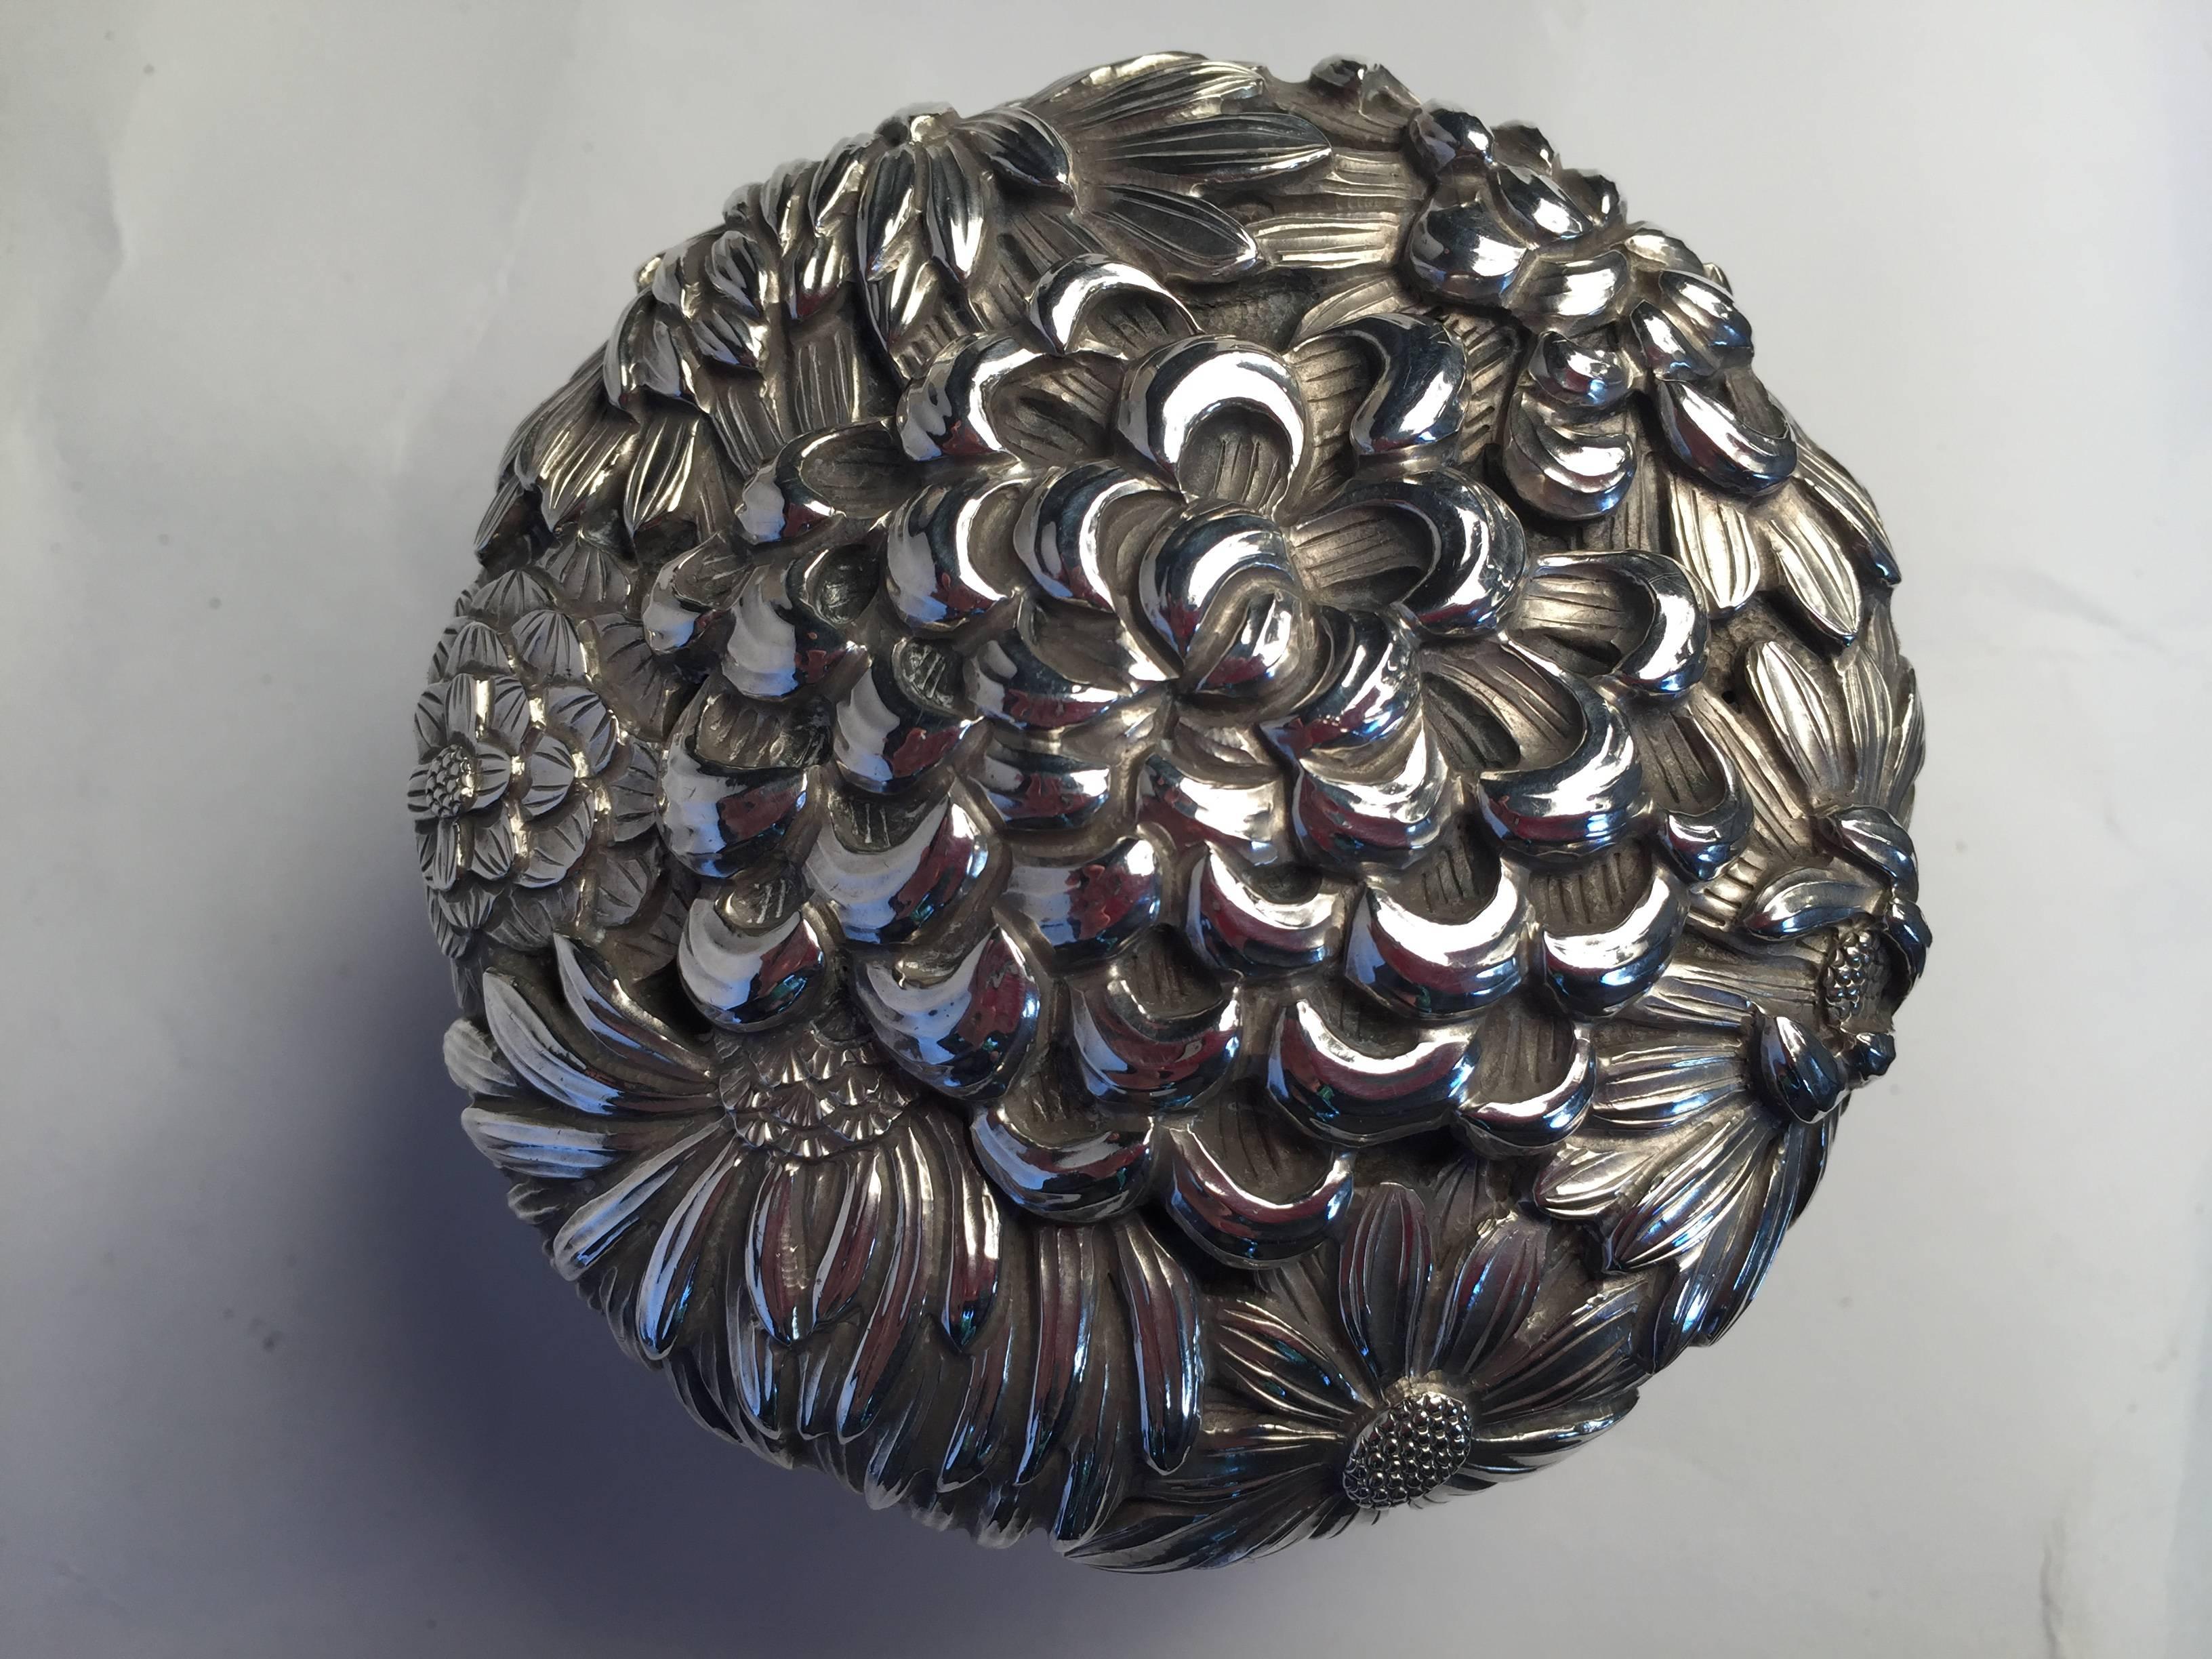 Japanese antique sterling silver Blooming Chrysanthemum treasures box would make a perfect gift for caressing precious treasures, flowers and more.

This lovely box features dramatic three dimensional bunches of popular blooming Chrysanthemum